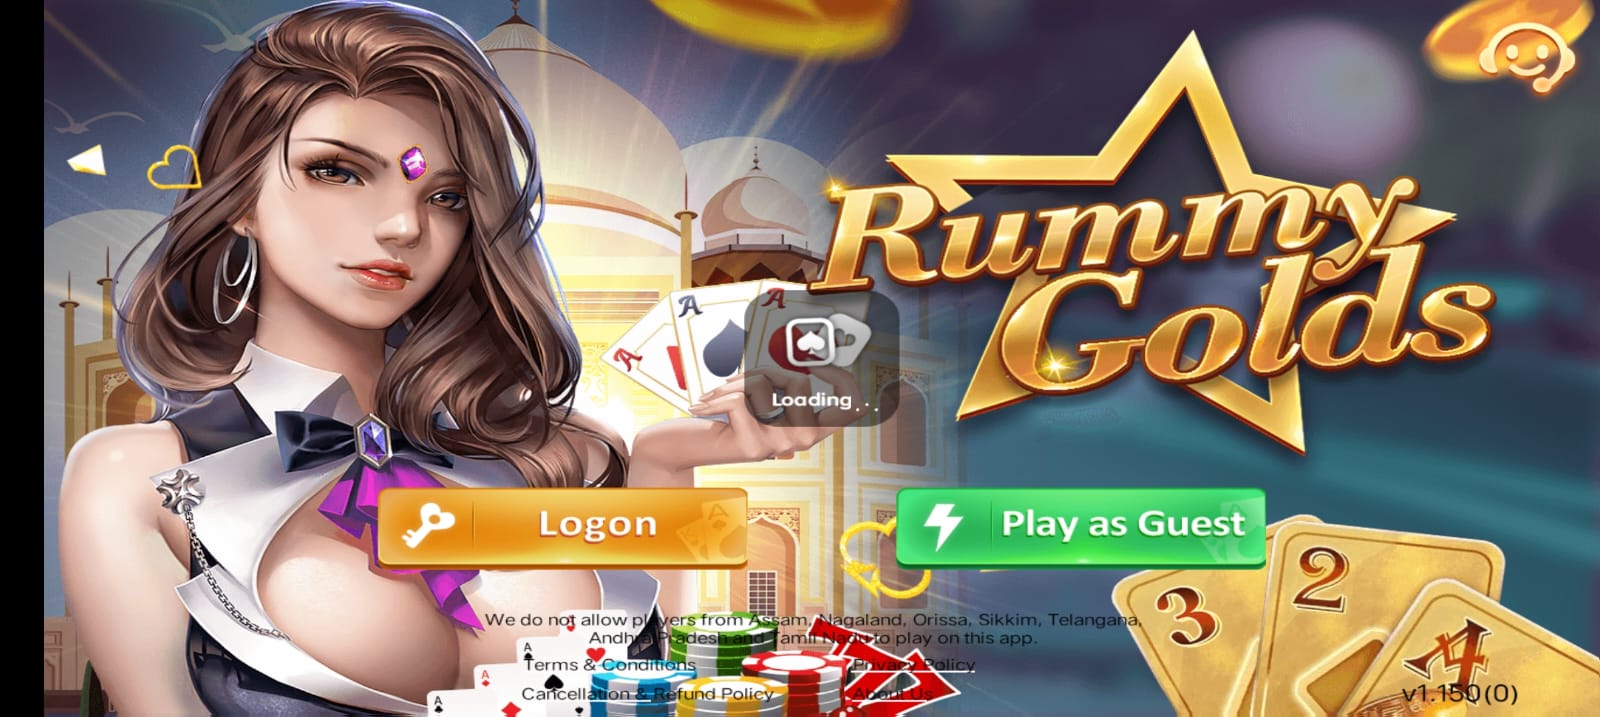 Create Account In "Rummy Golds Apk''